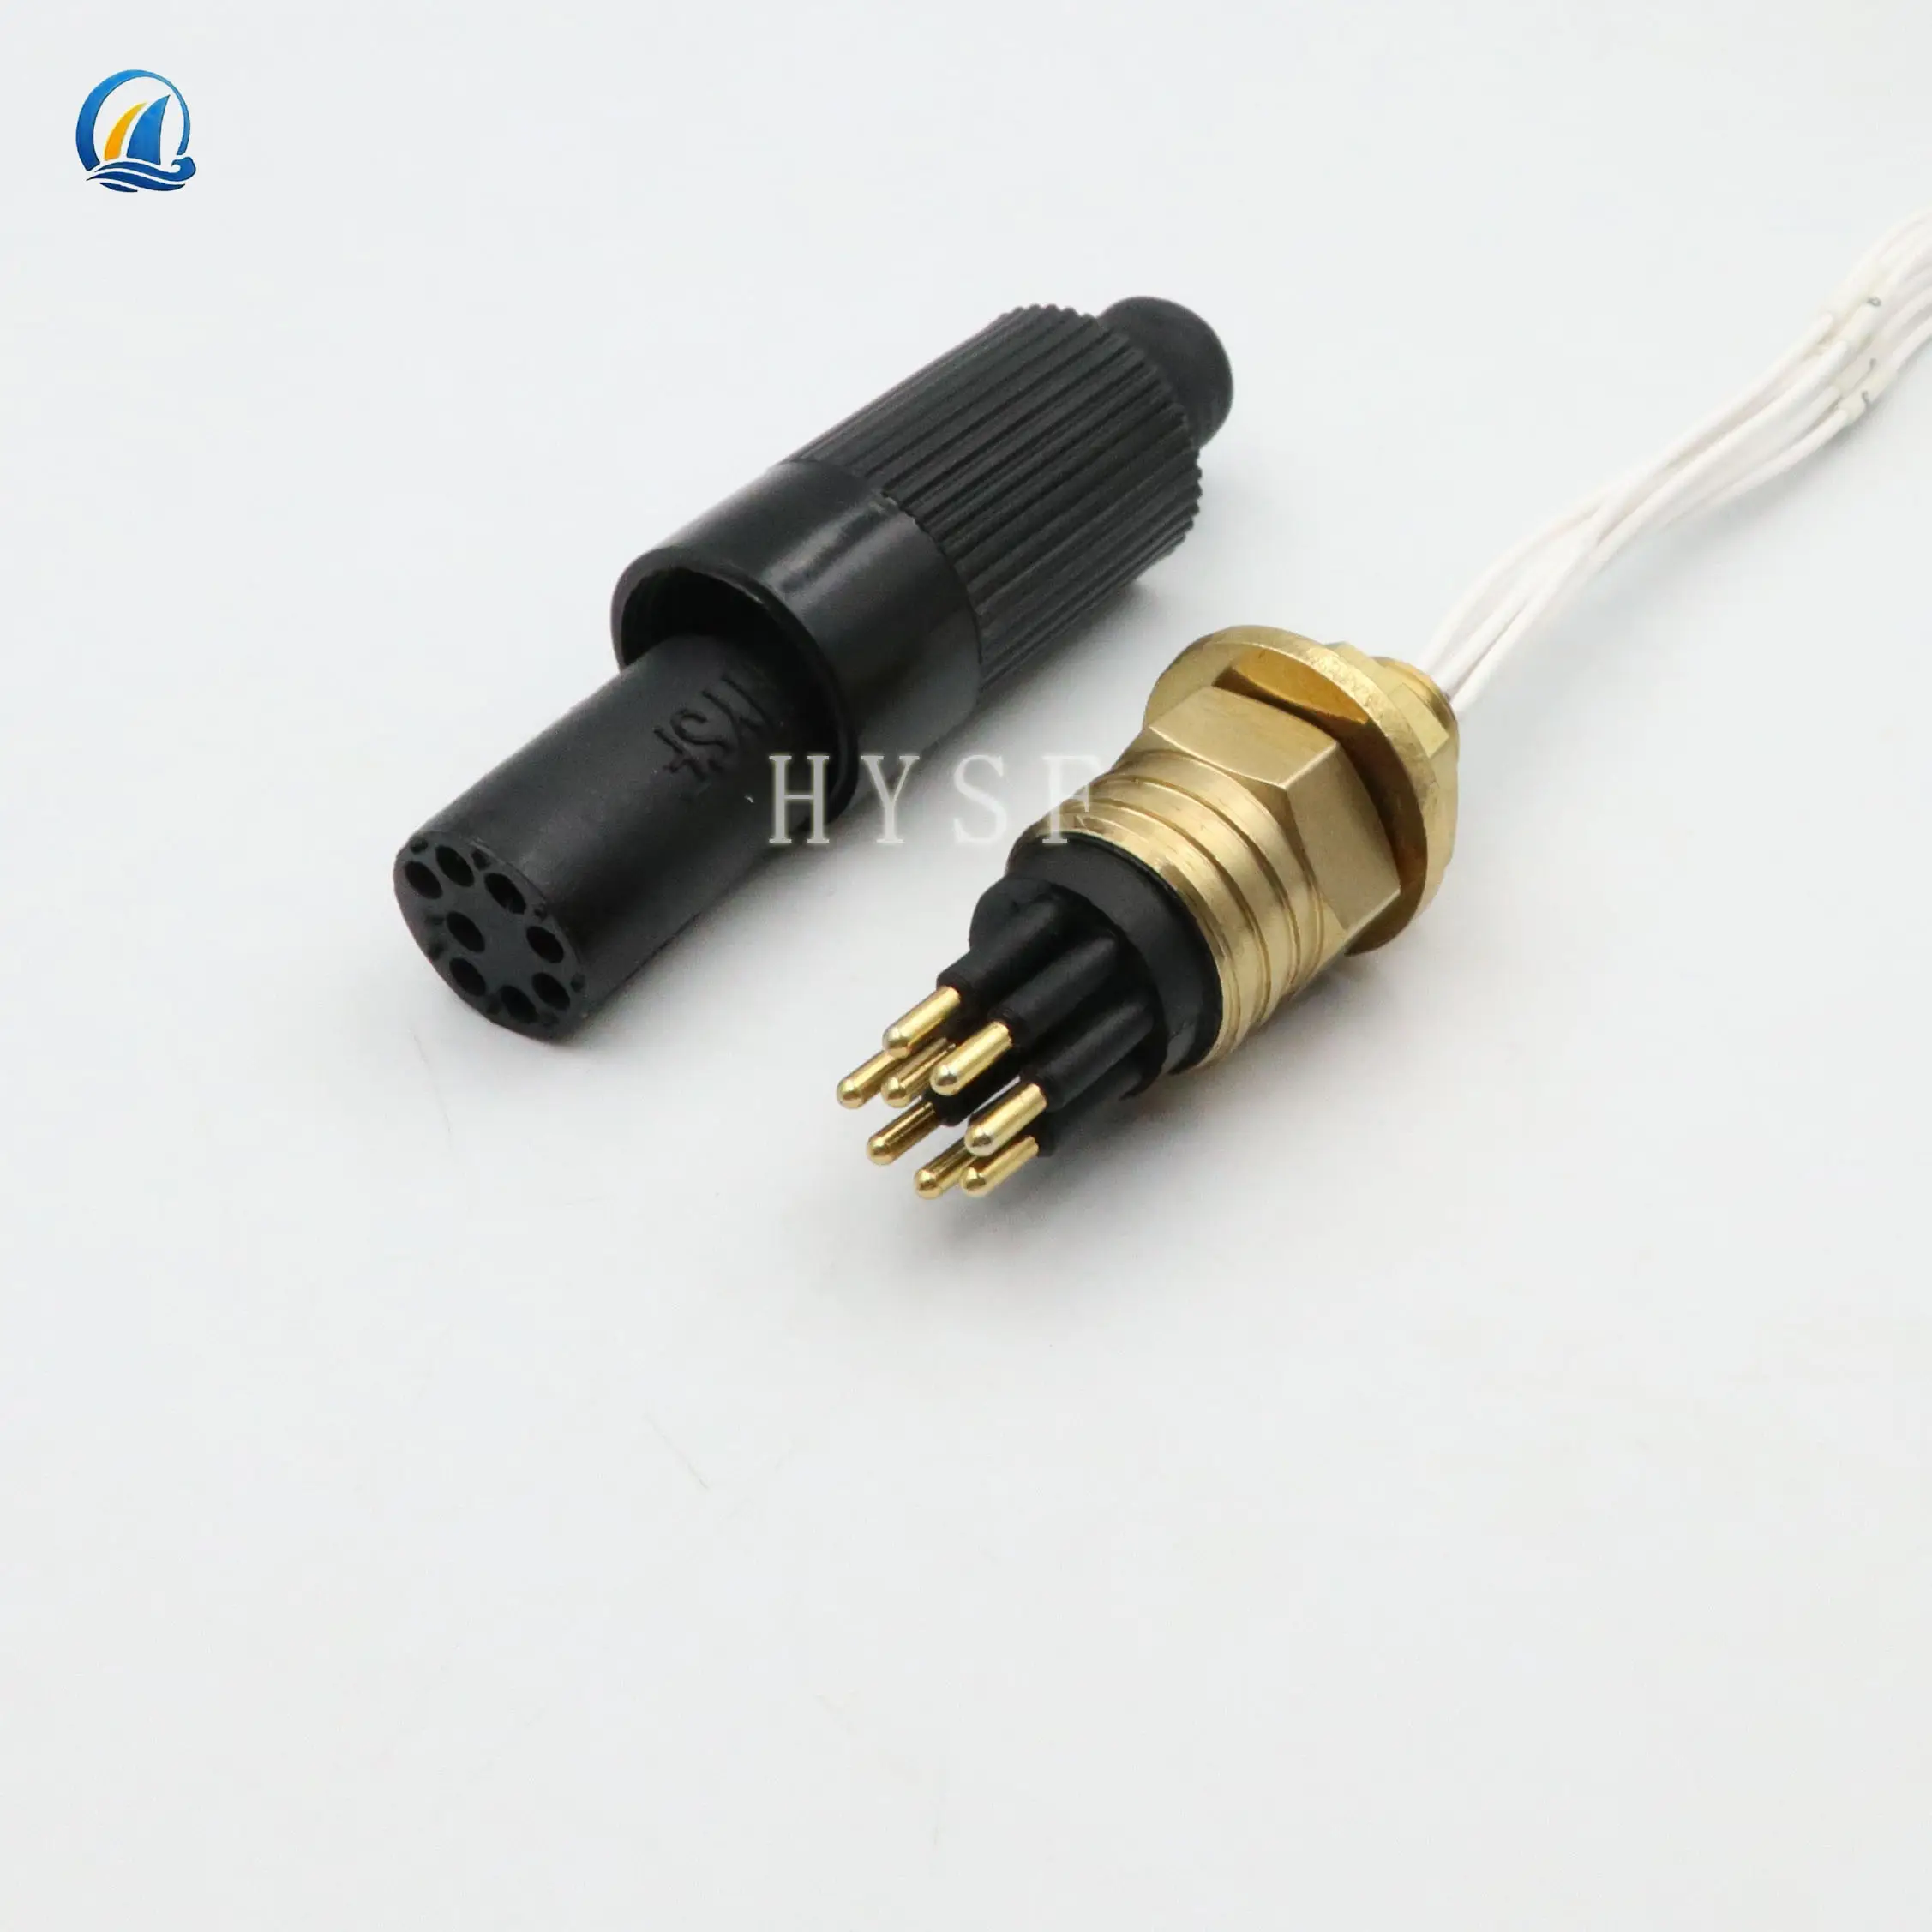 MCBH13M MCIL16F Miniature Sea Copper 2-16 Core Deep Water Connector Underwater Wet Pluggable Male And Female Plugs